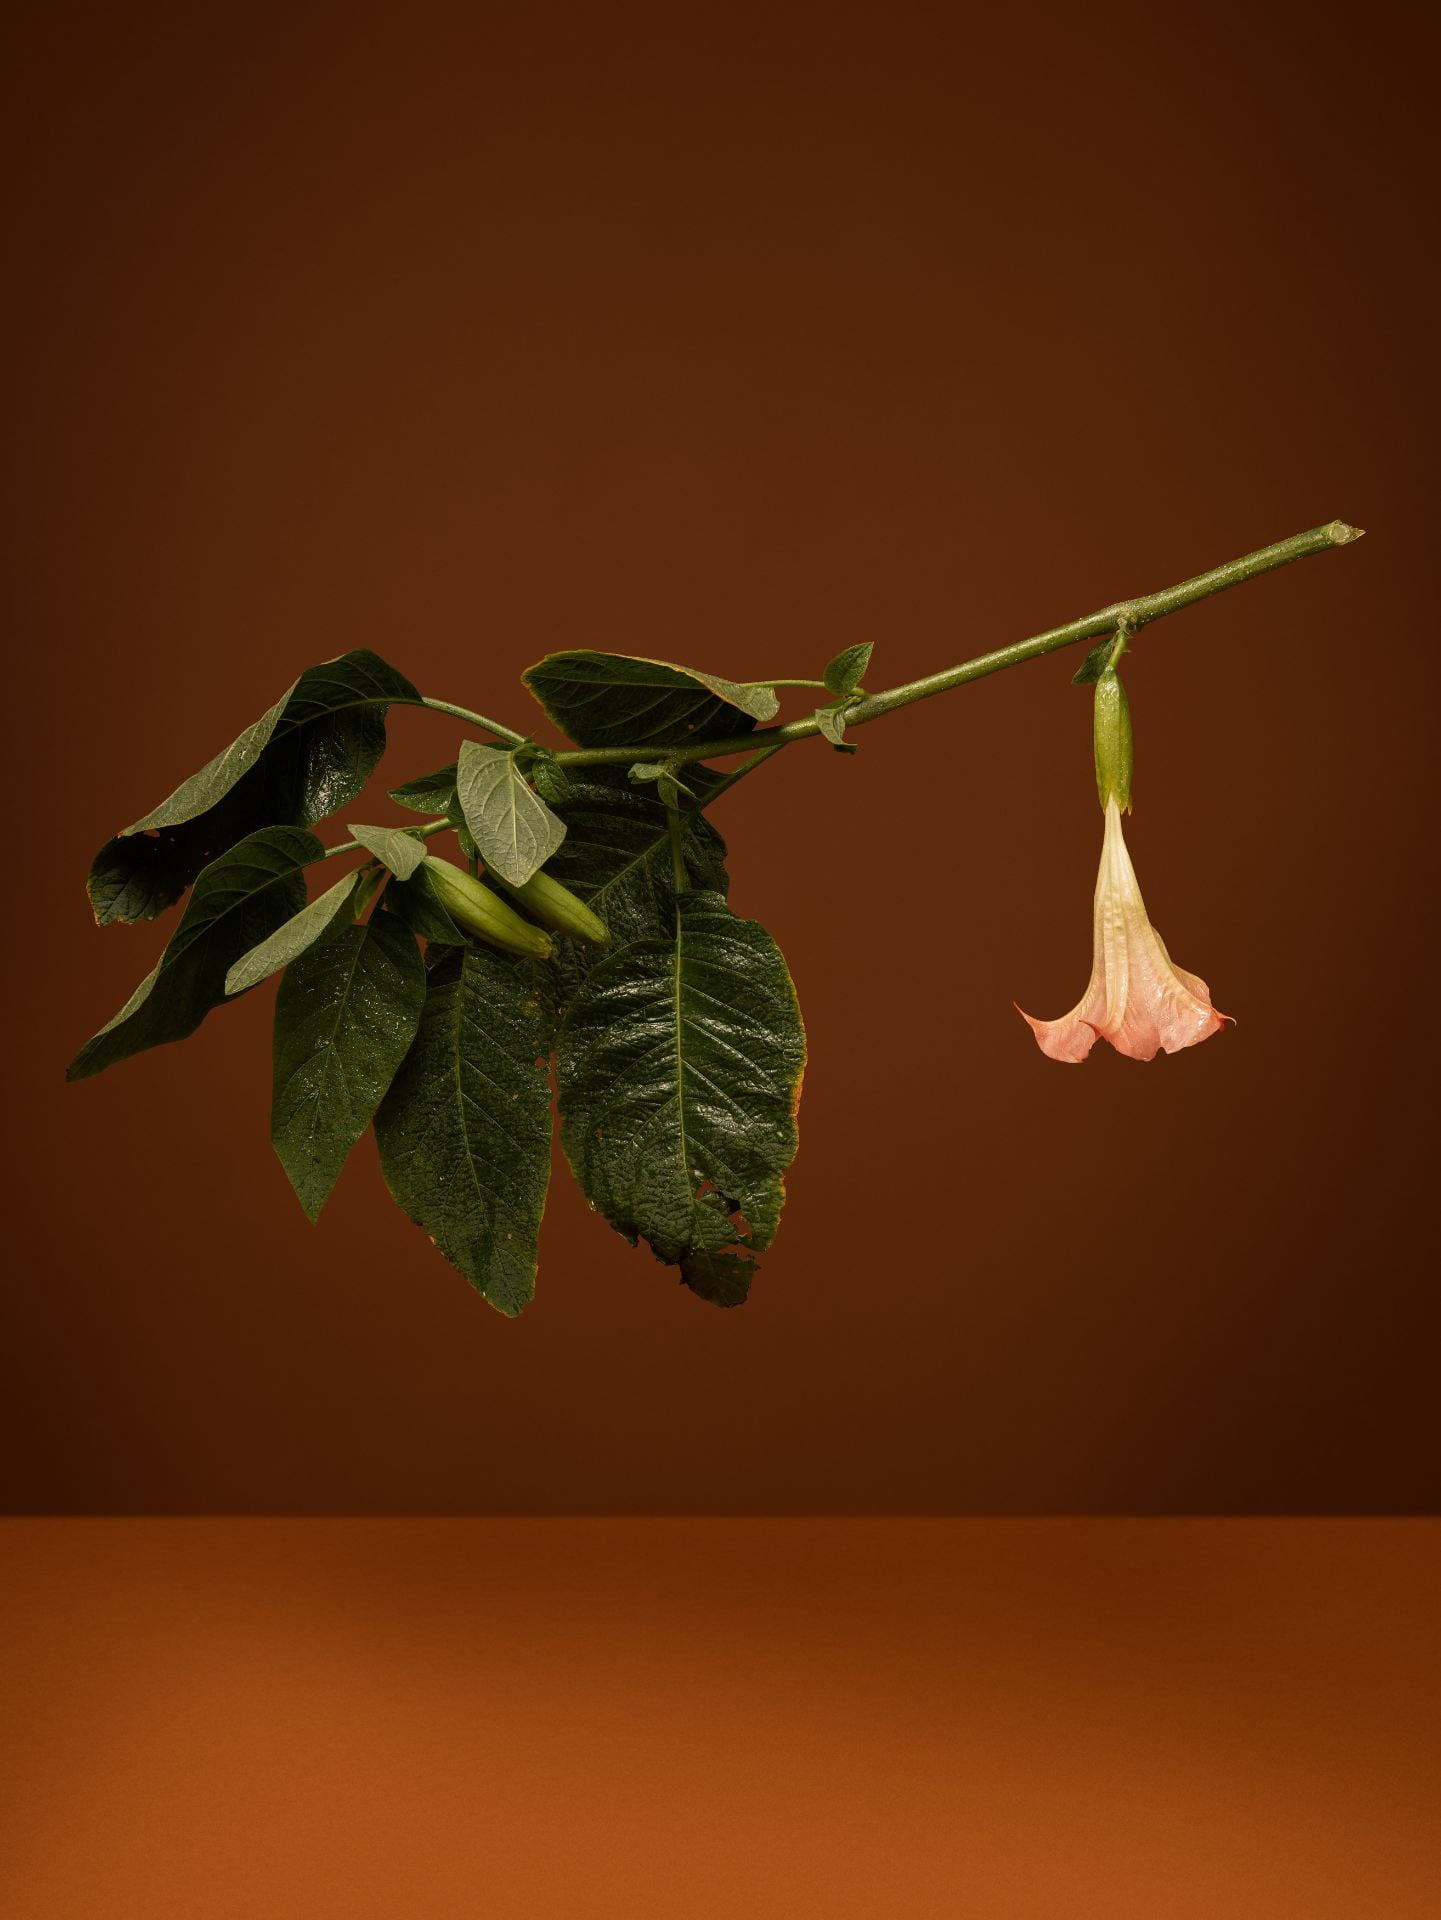 A flower with dark green leaves suspended in the air against a deep maroon brown backdrop. The flowery branch is positioned to look like a witch's broomstick hovering in the air.